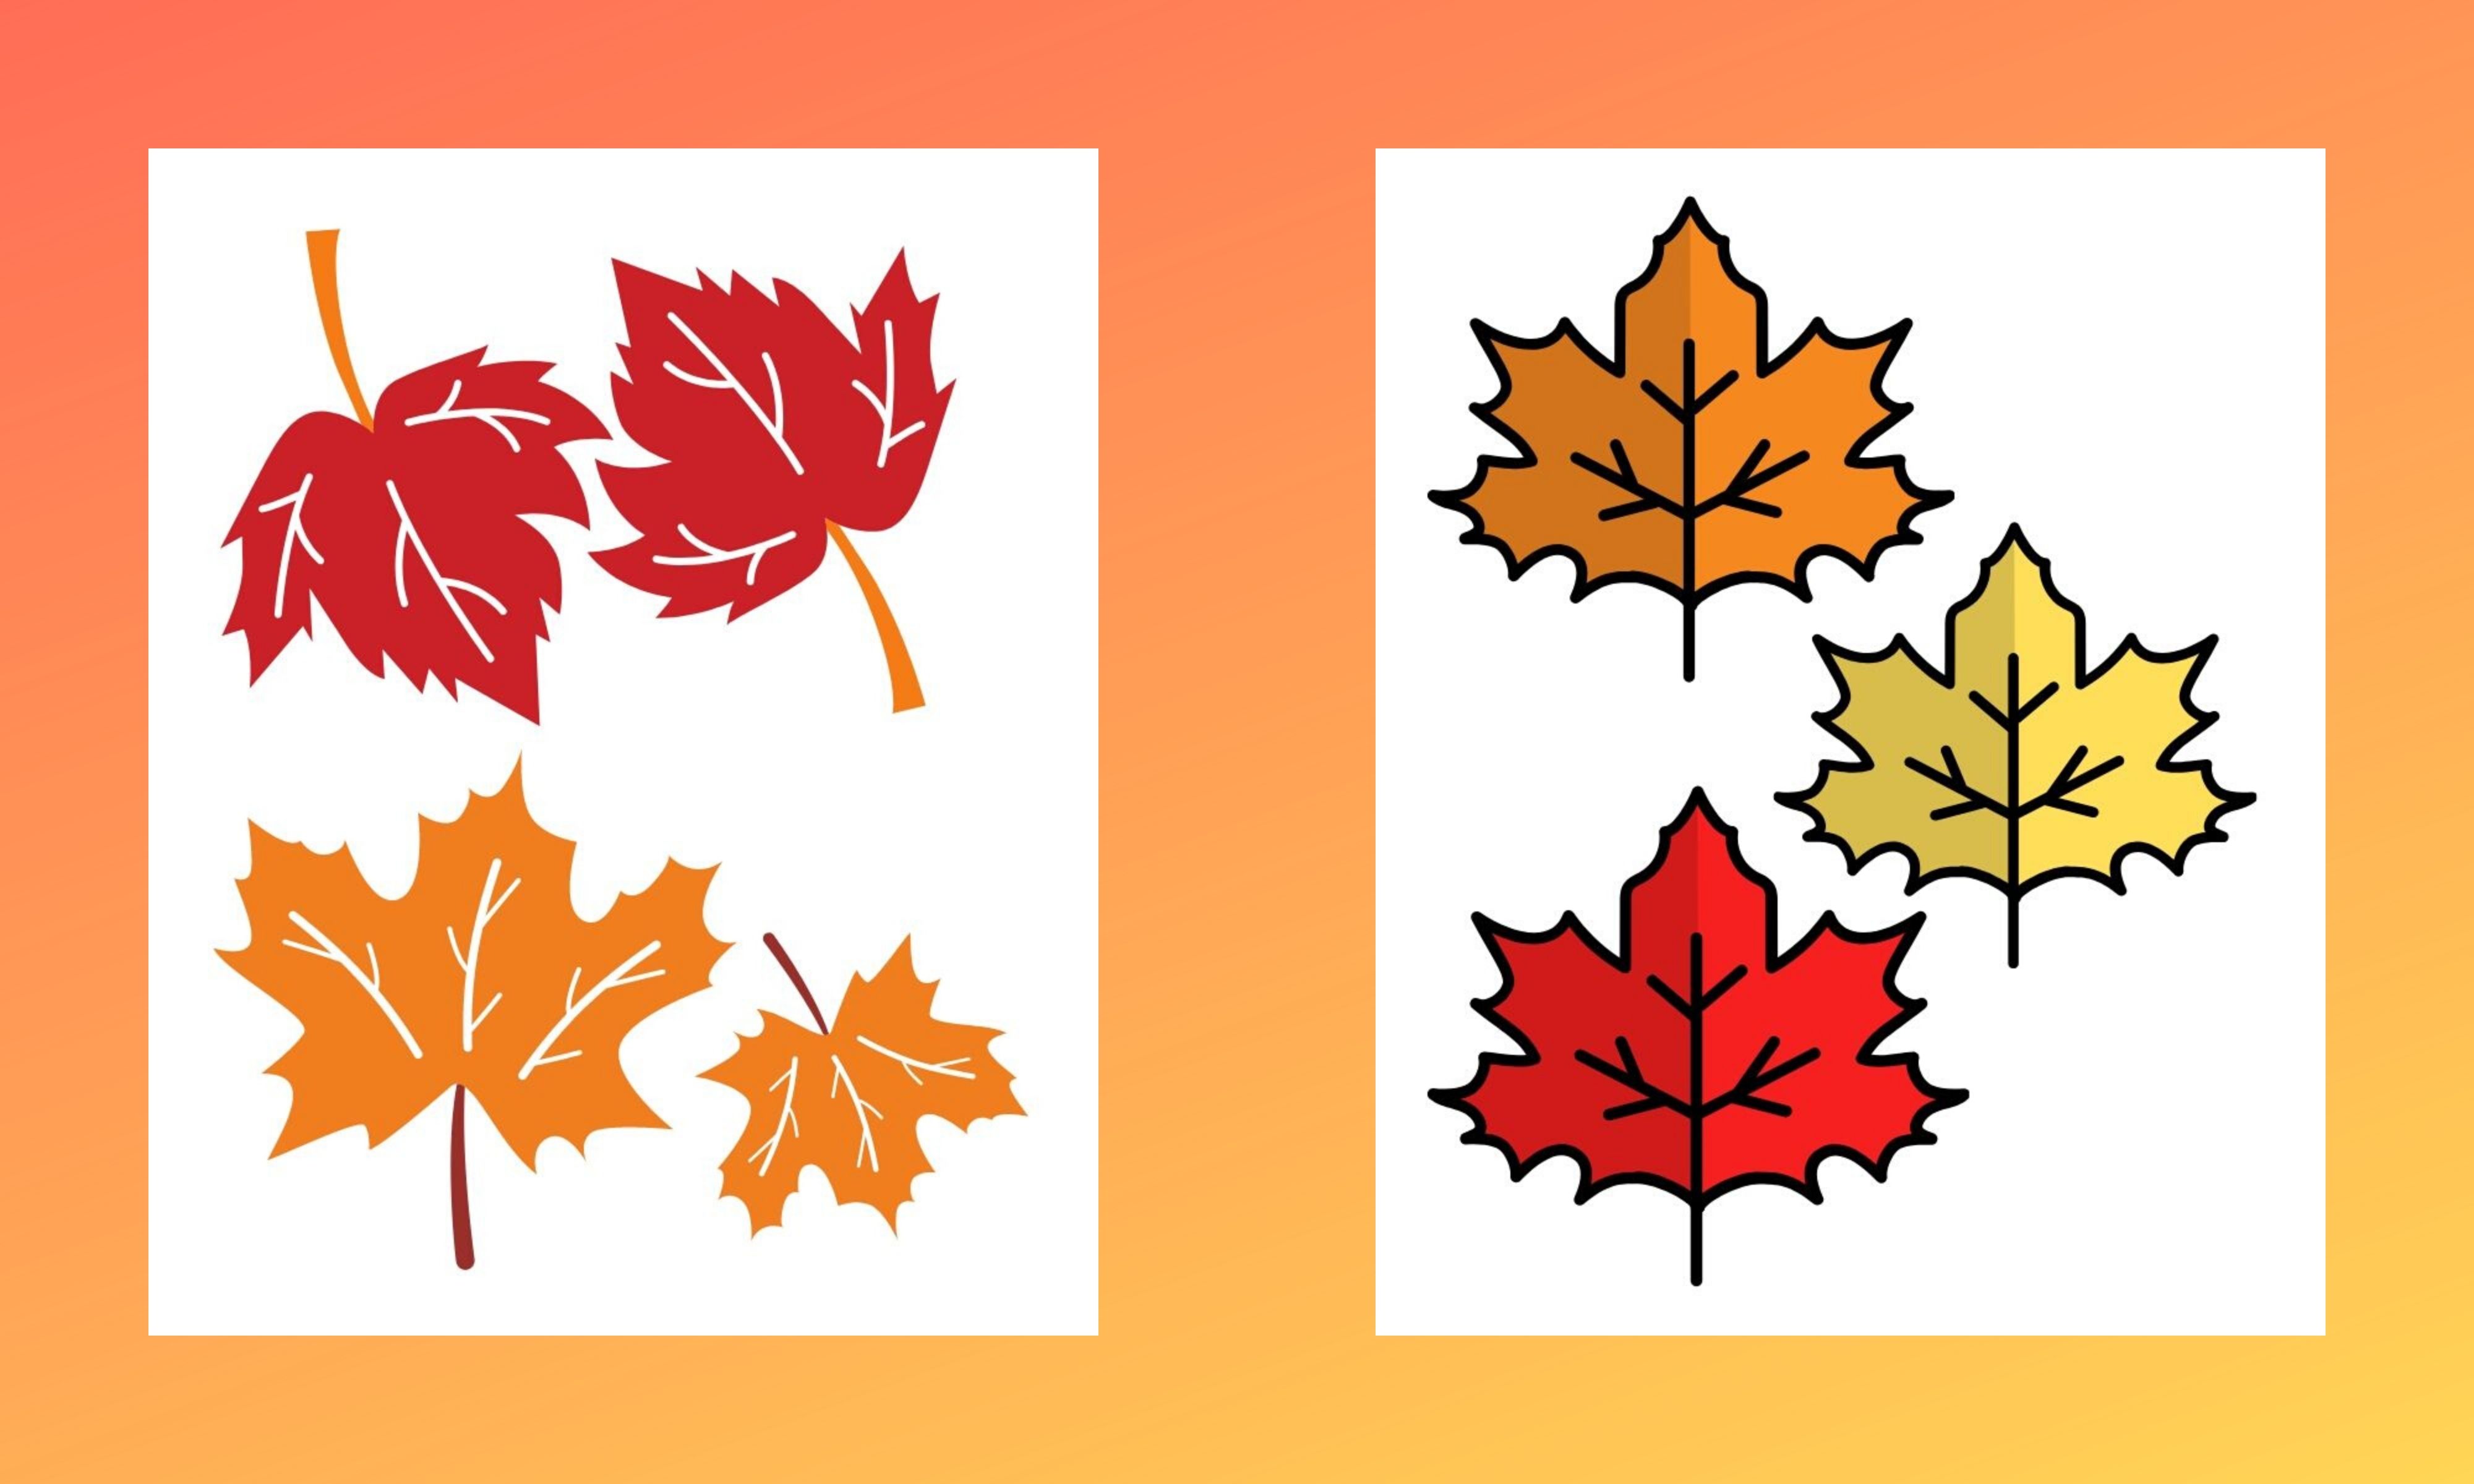 Red, orange, and yellow fall leaves that can be cut out to use for decorations or crafts.